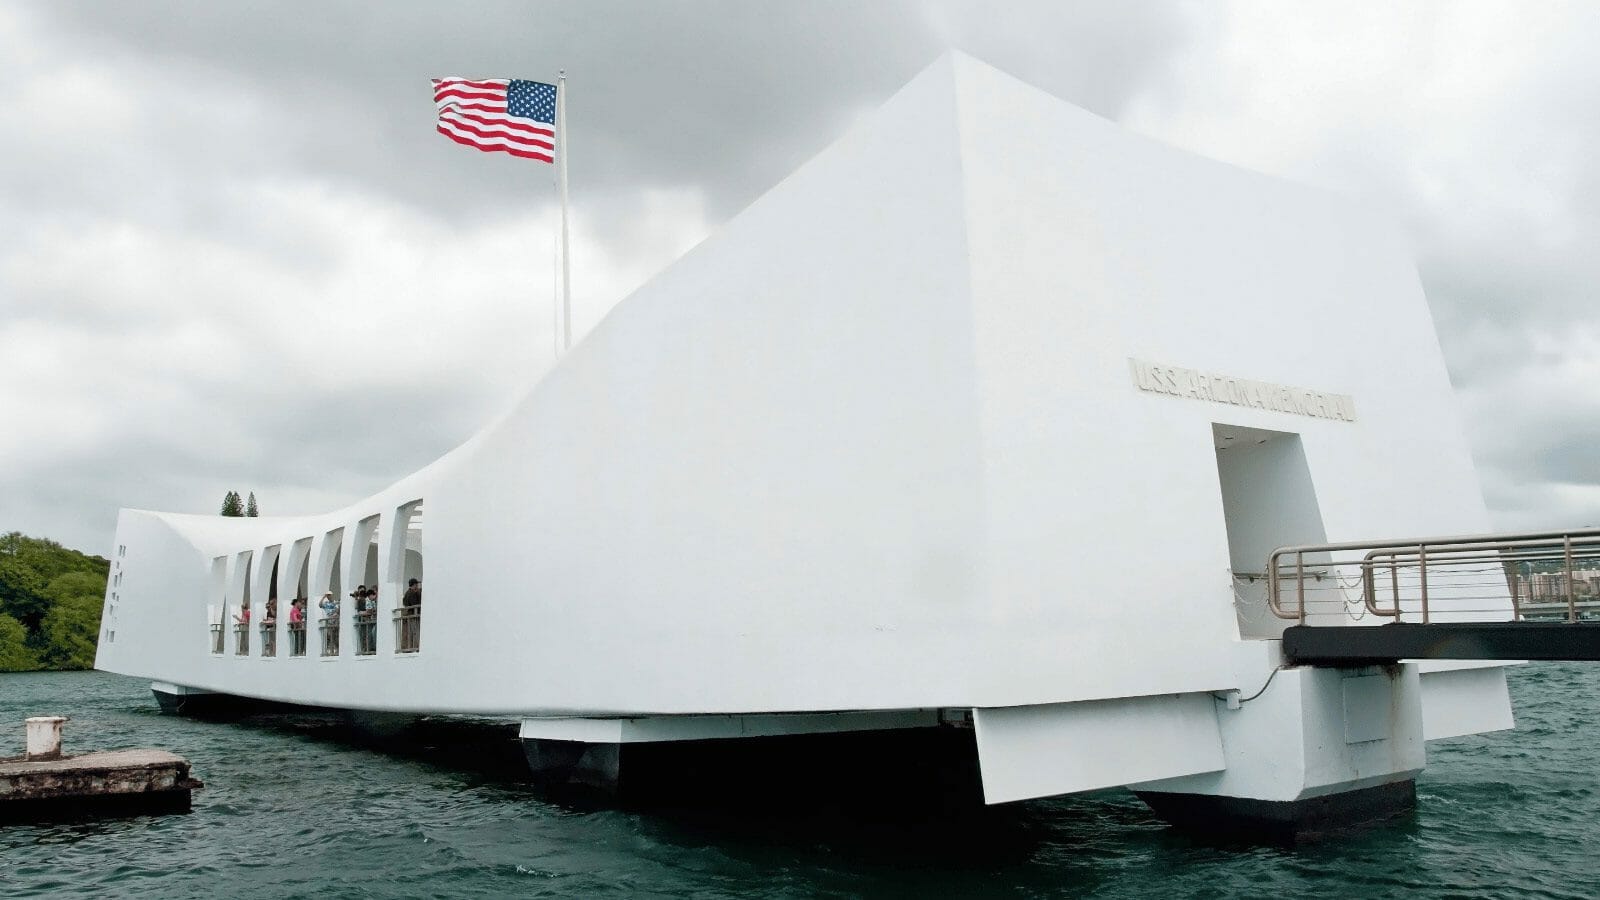 <p>Everybody knows that Pearl Harbor was the site of a surprise attack by the Japanese during World War II, and it was one of the worst attacks the nation has ever seen. Visitors can still see oil oozing from the engine rooms of the sunken ships.</p>